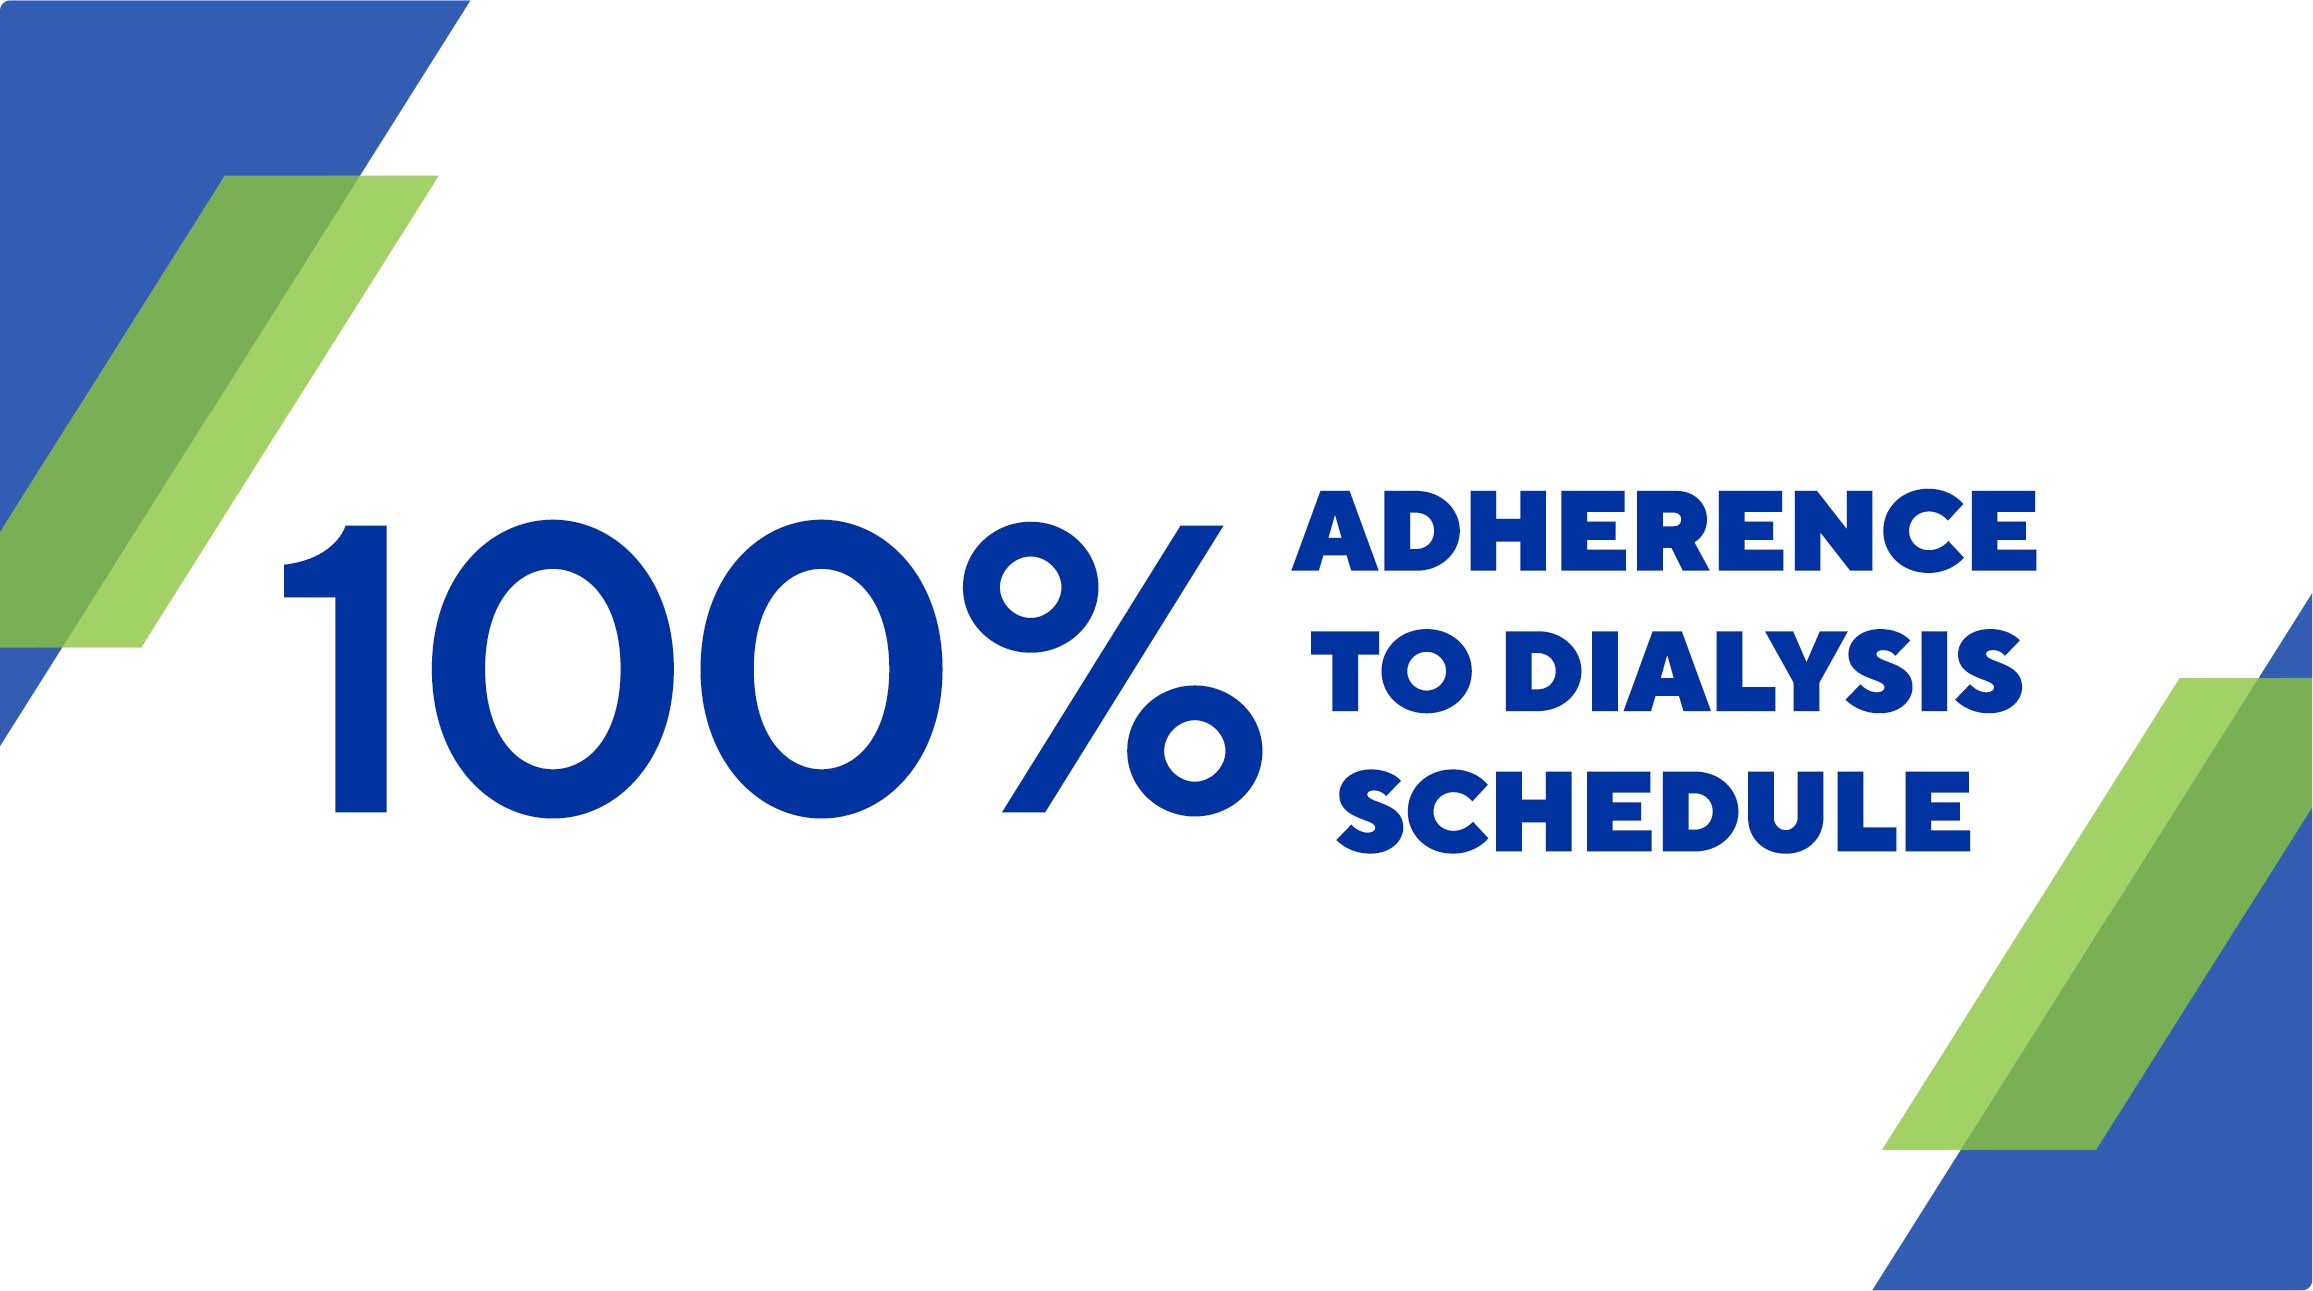 100% Adherence to Dialysis Schedule